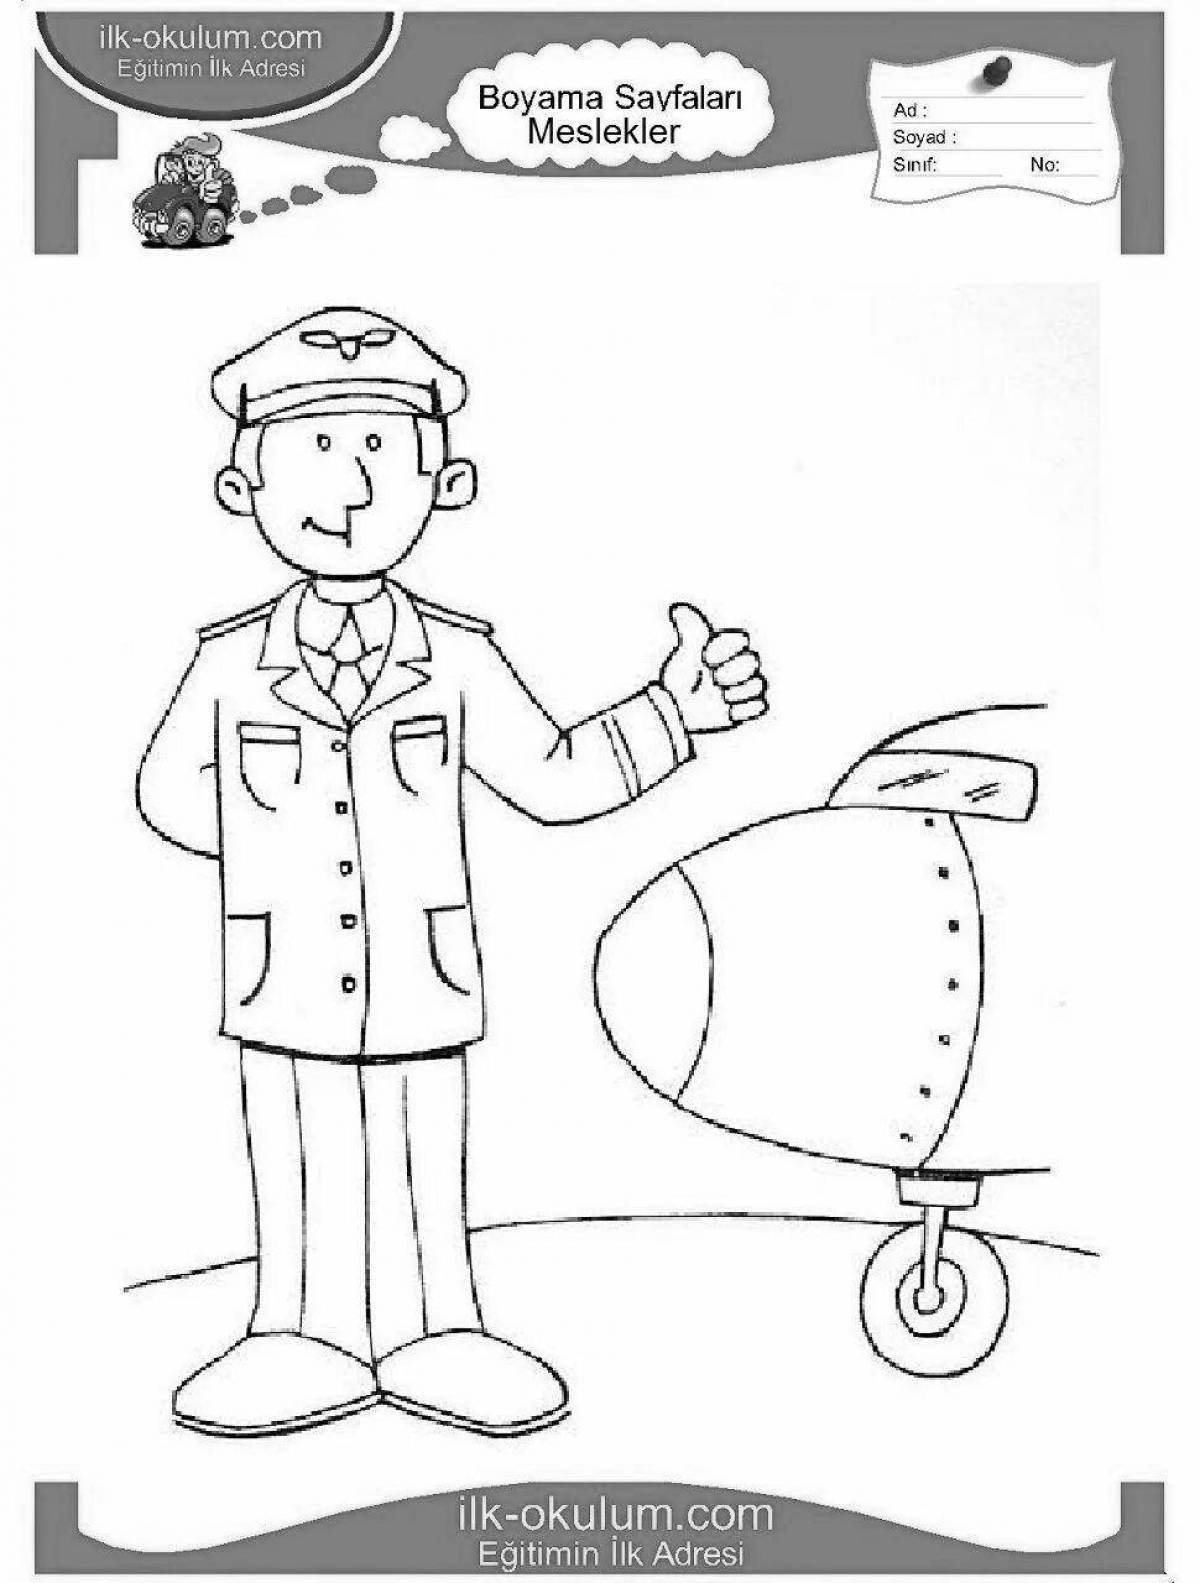 A fun coloring book of the military profession for preschoolers